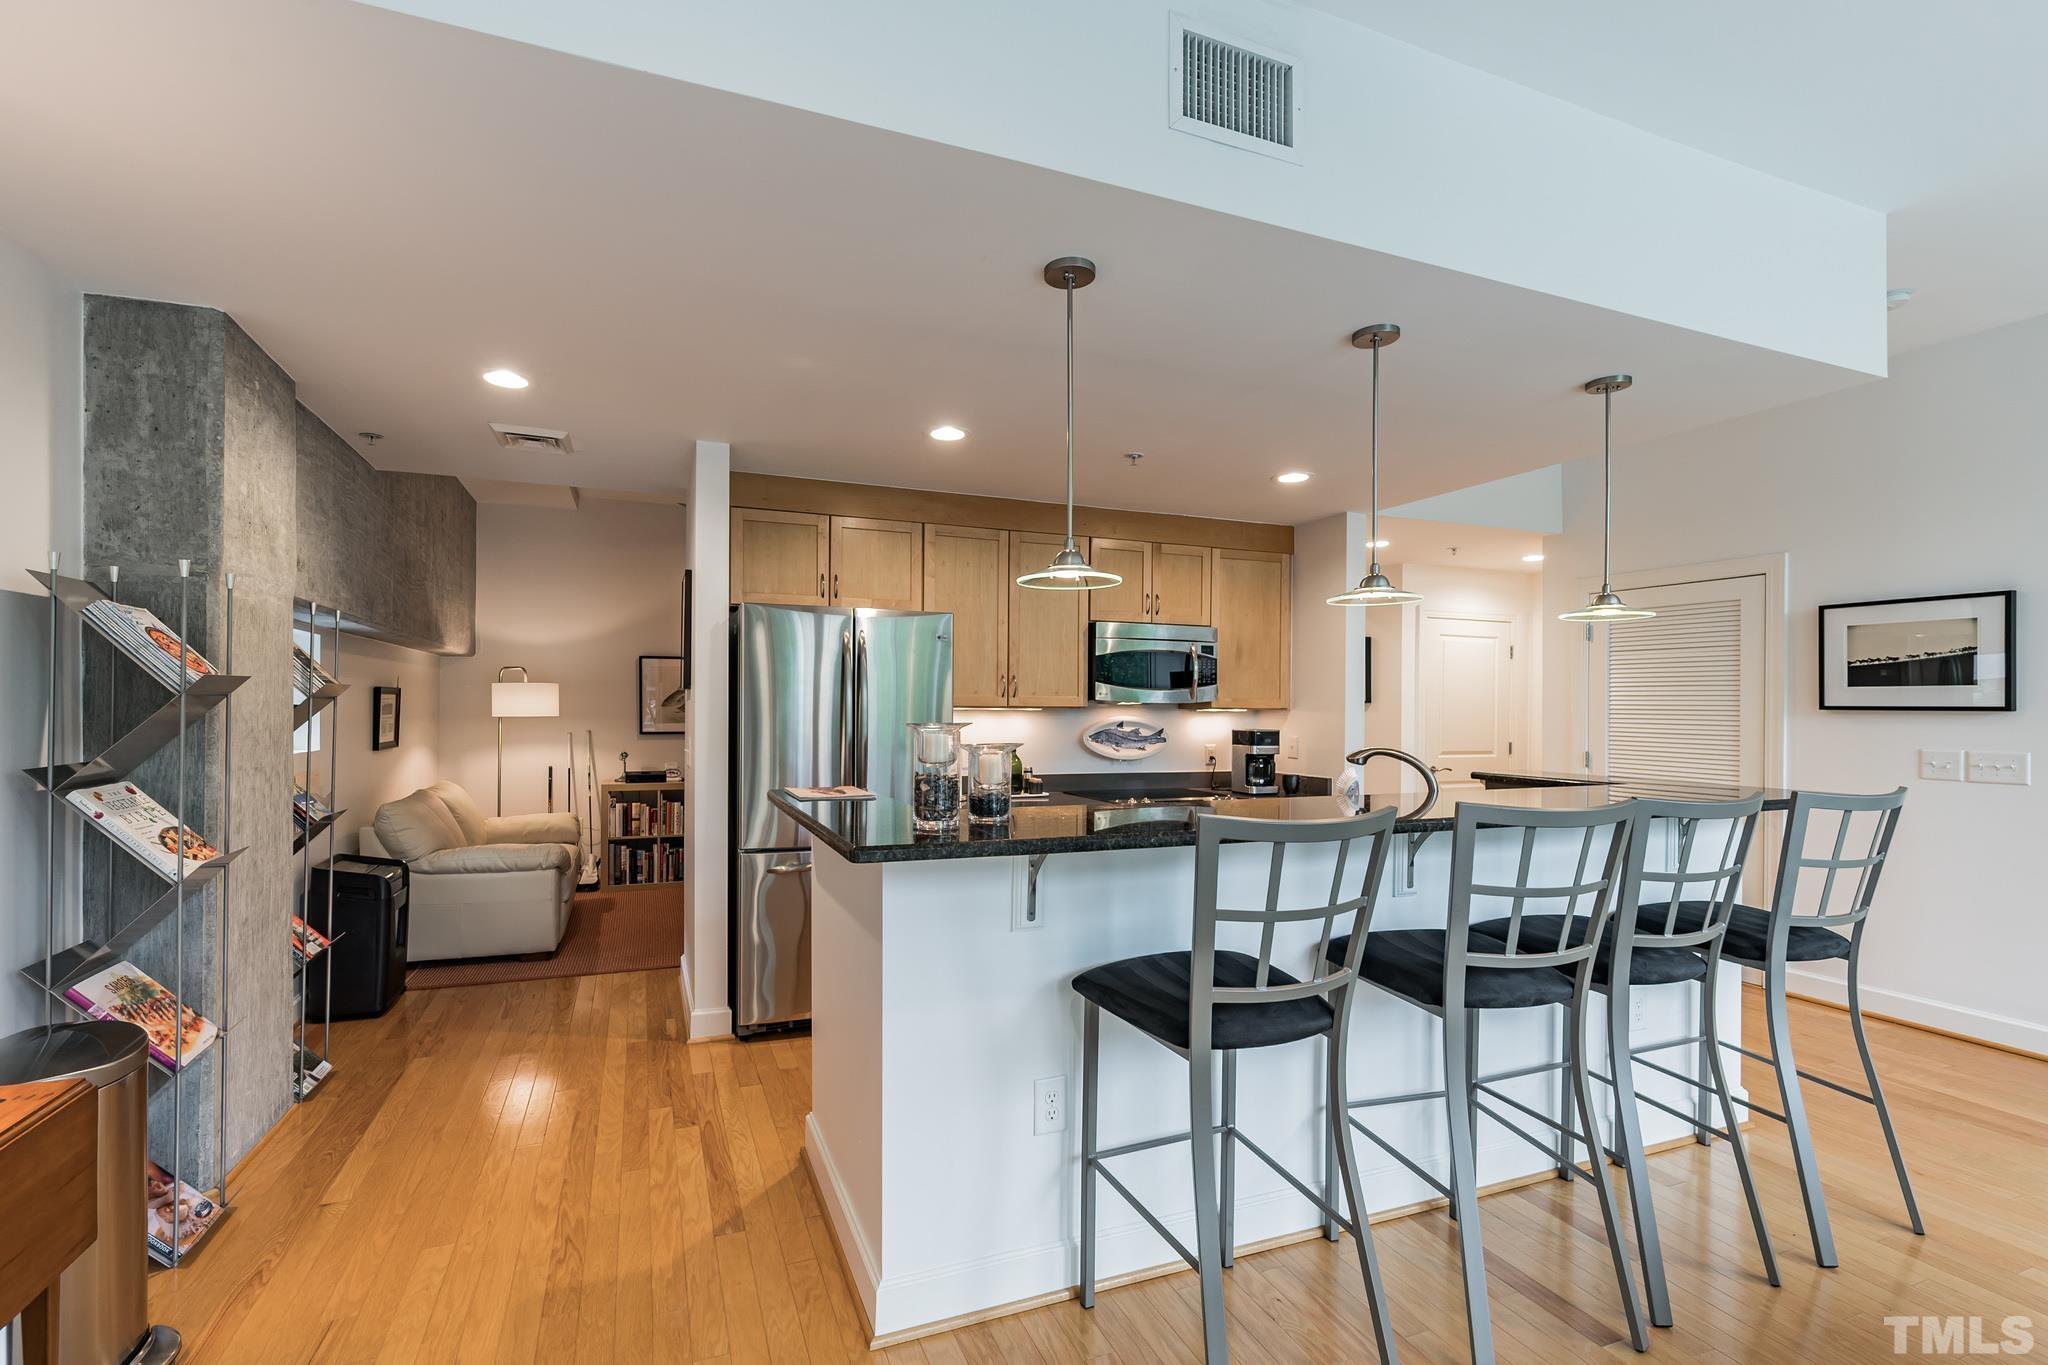 a kitchen with stainless steel appliances kitchen island granite countertop a dining table chairs and a refrigerator